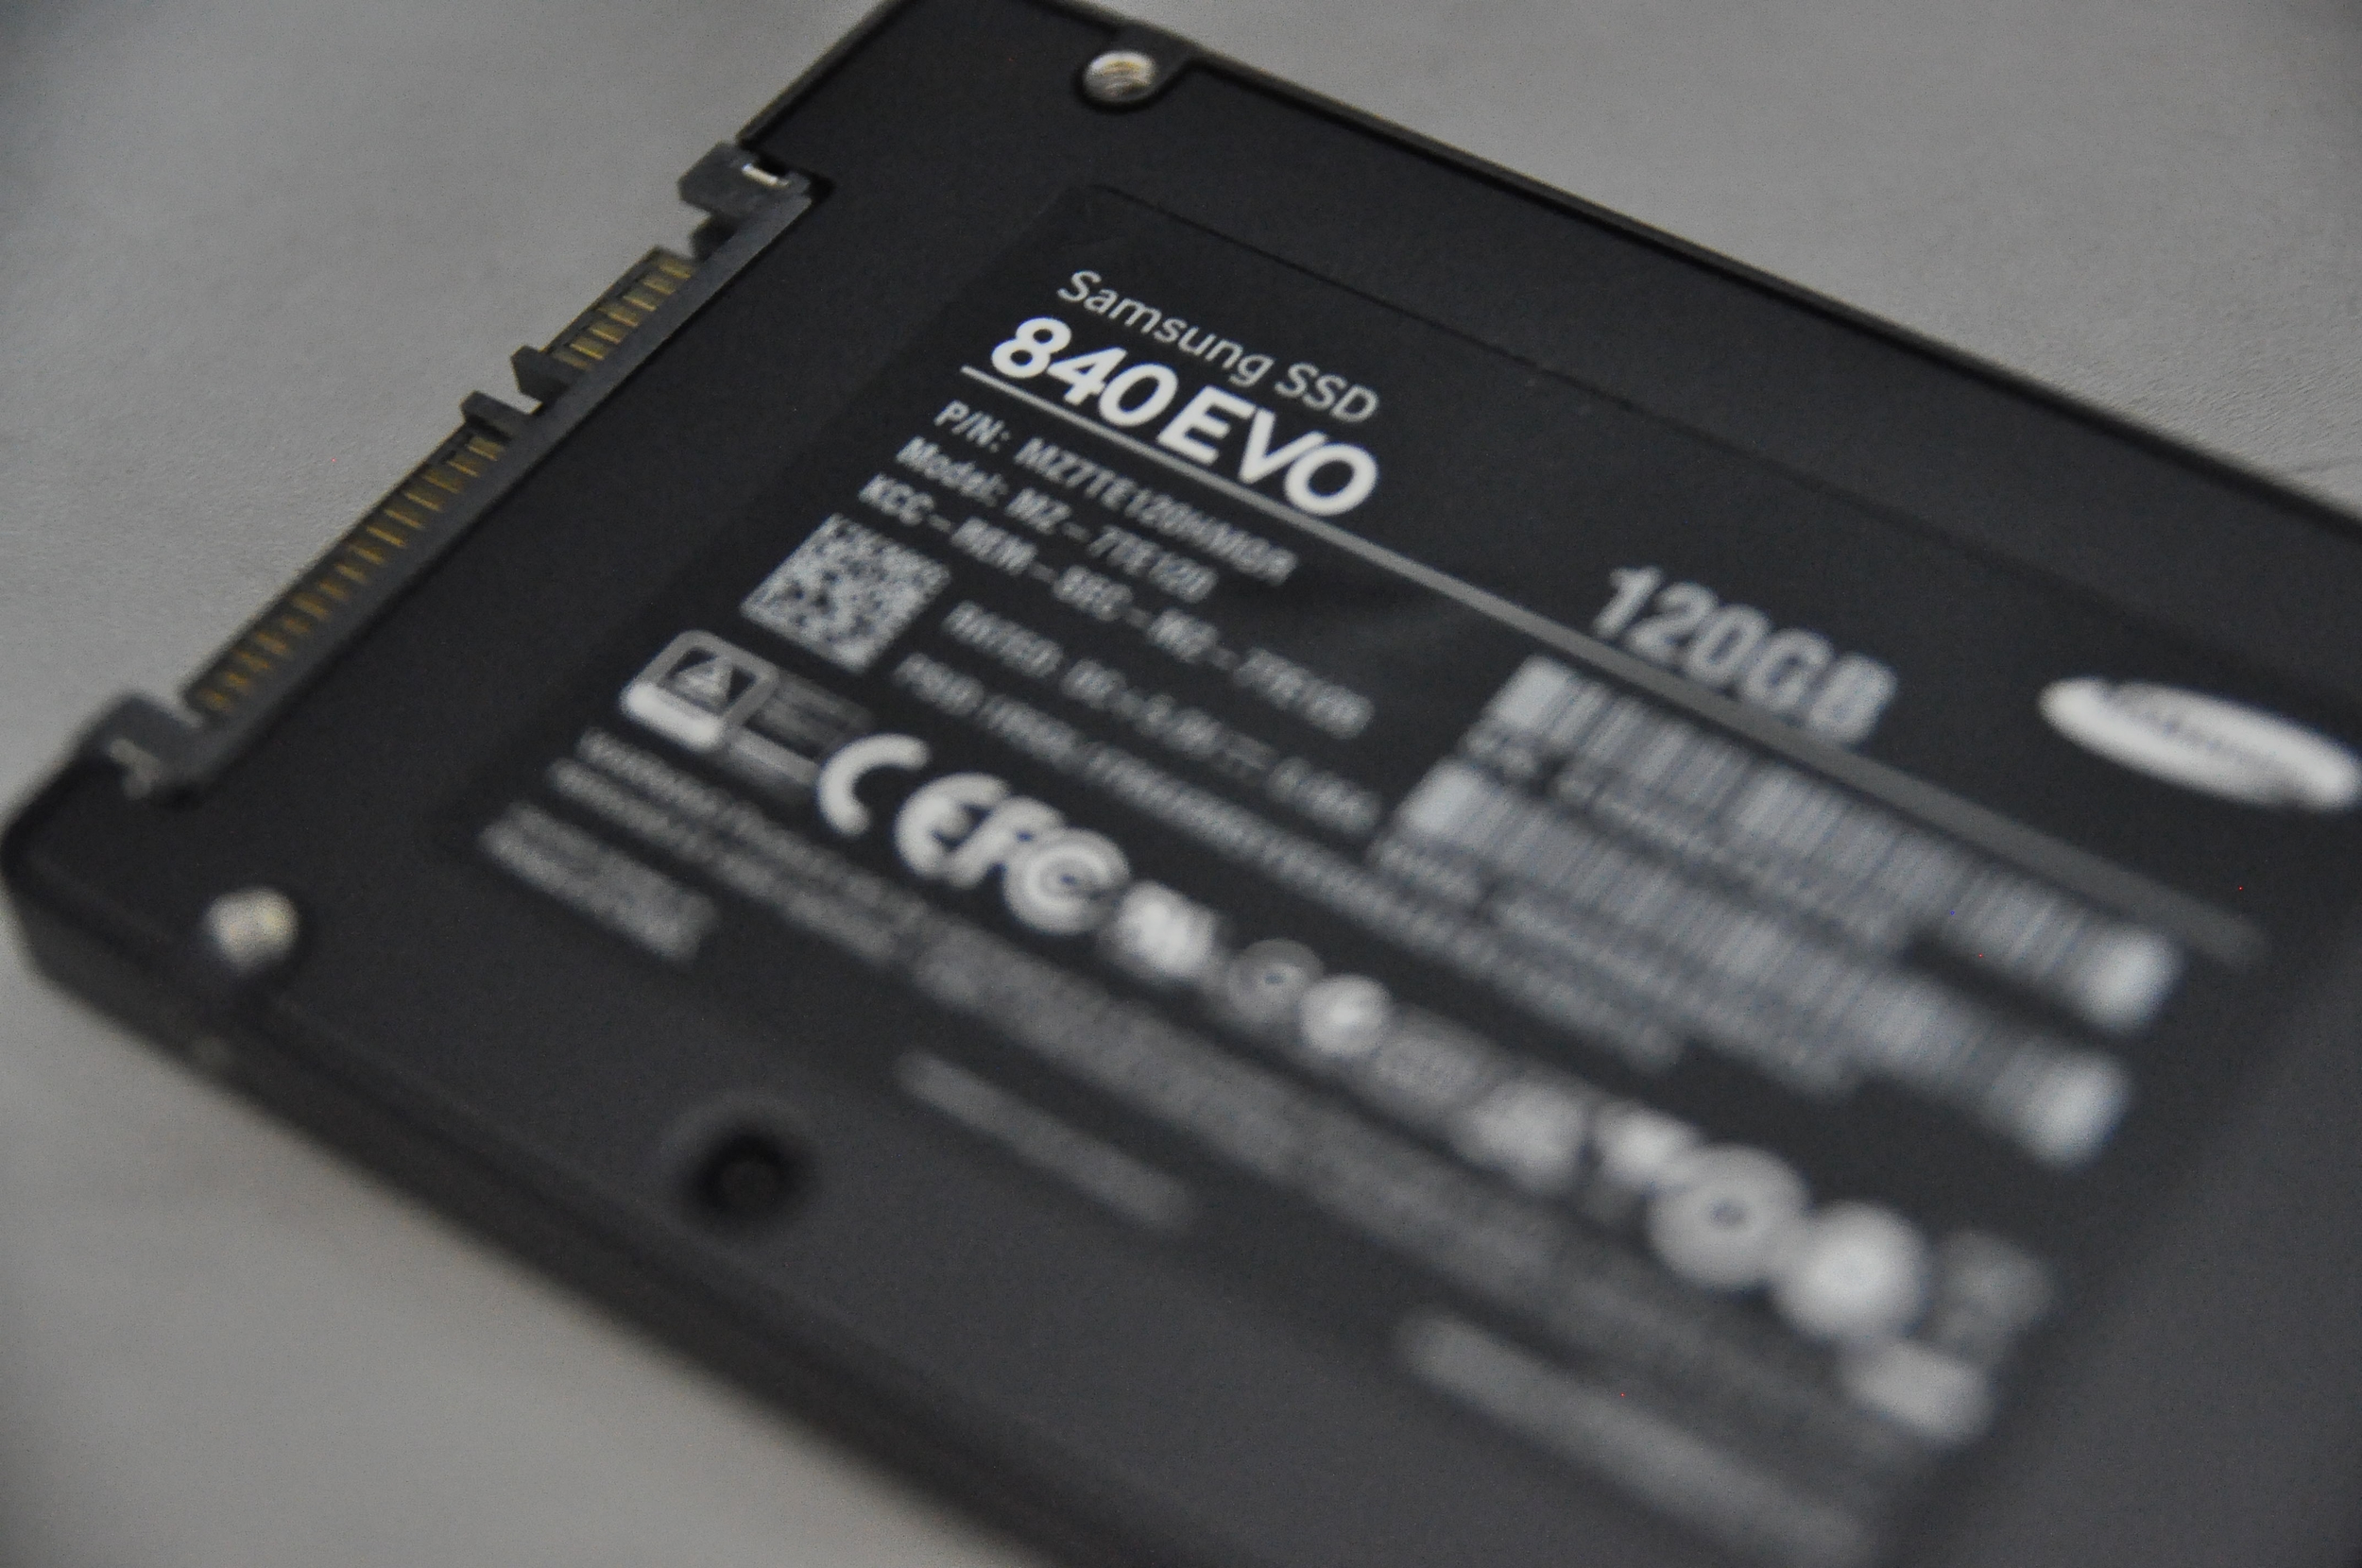 how to format samsung ssd 840 evo